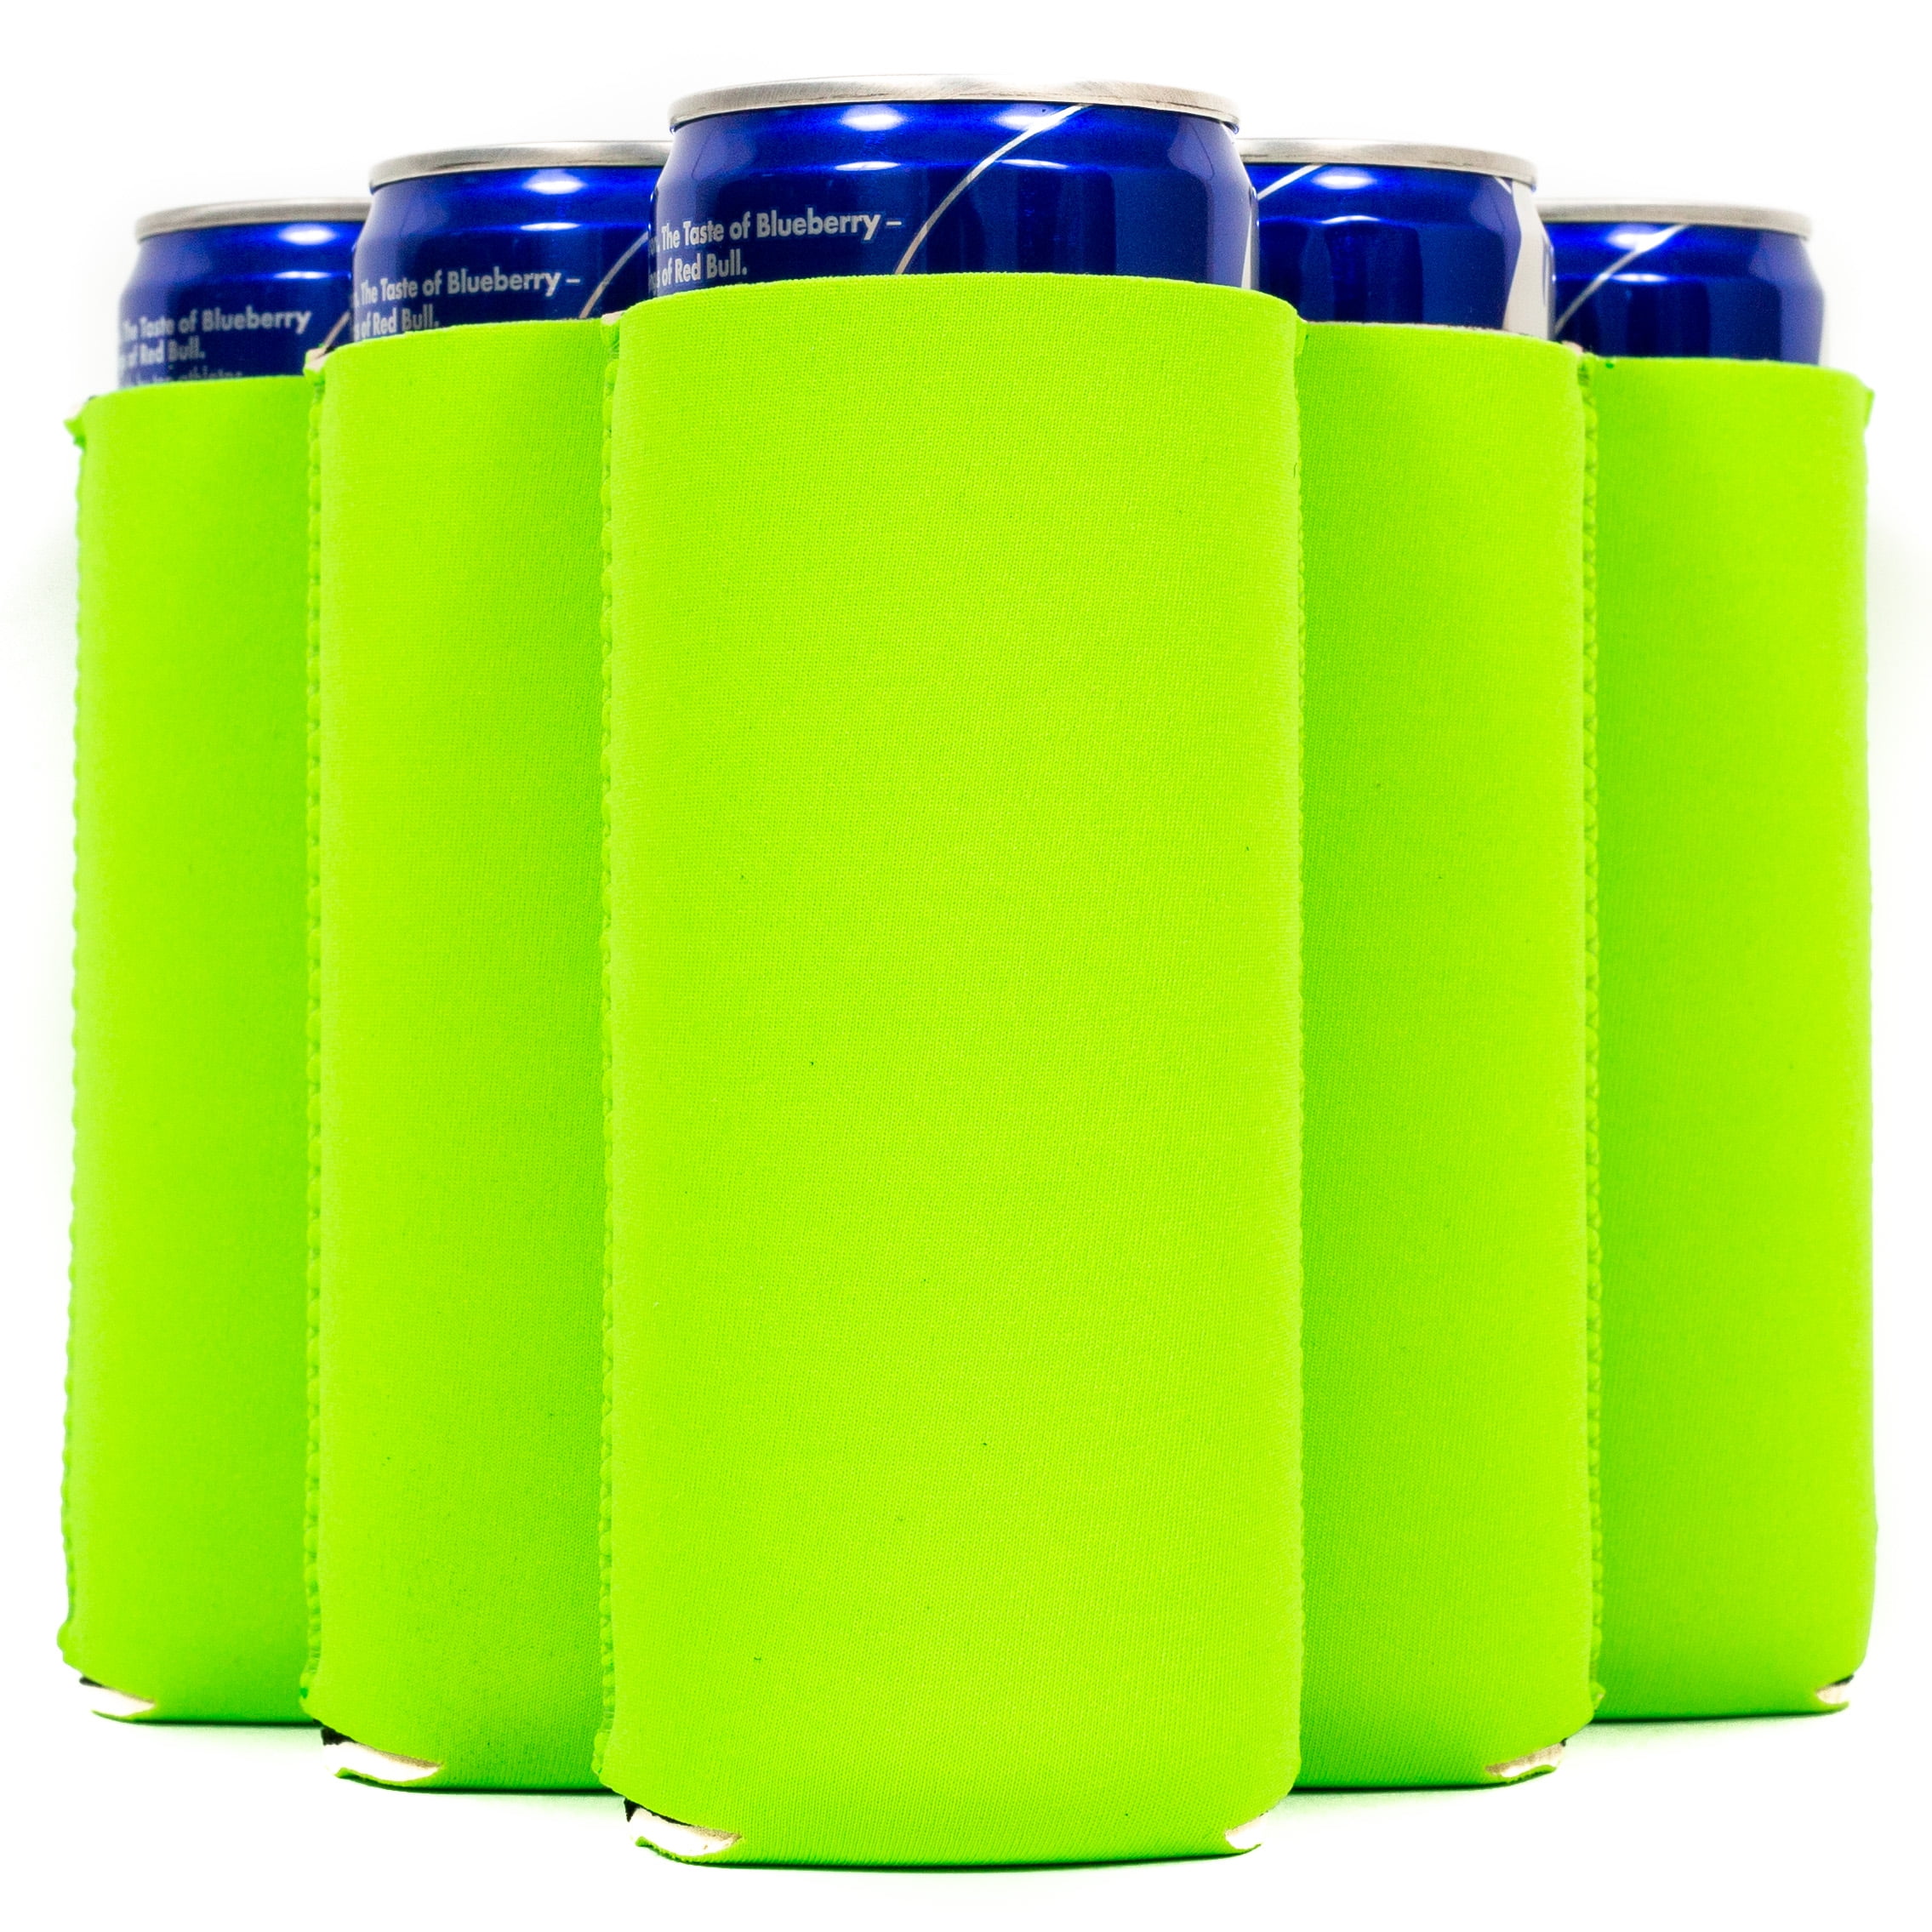 SquidCup Slim Sqoozie Non-Tipping Insulated Can Holder - 12 oz. Slim